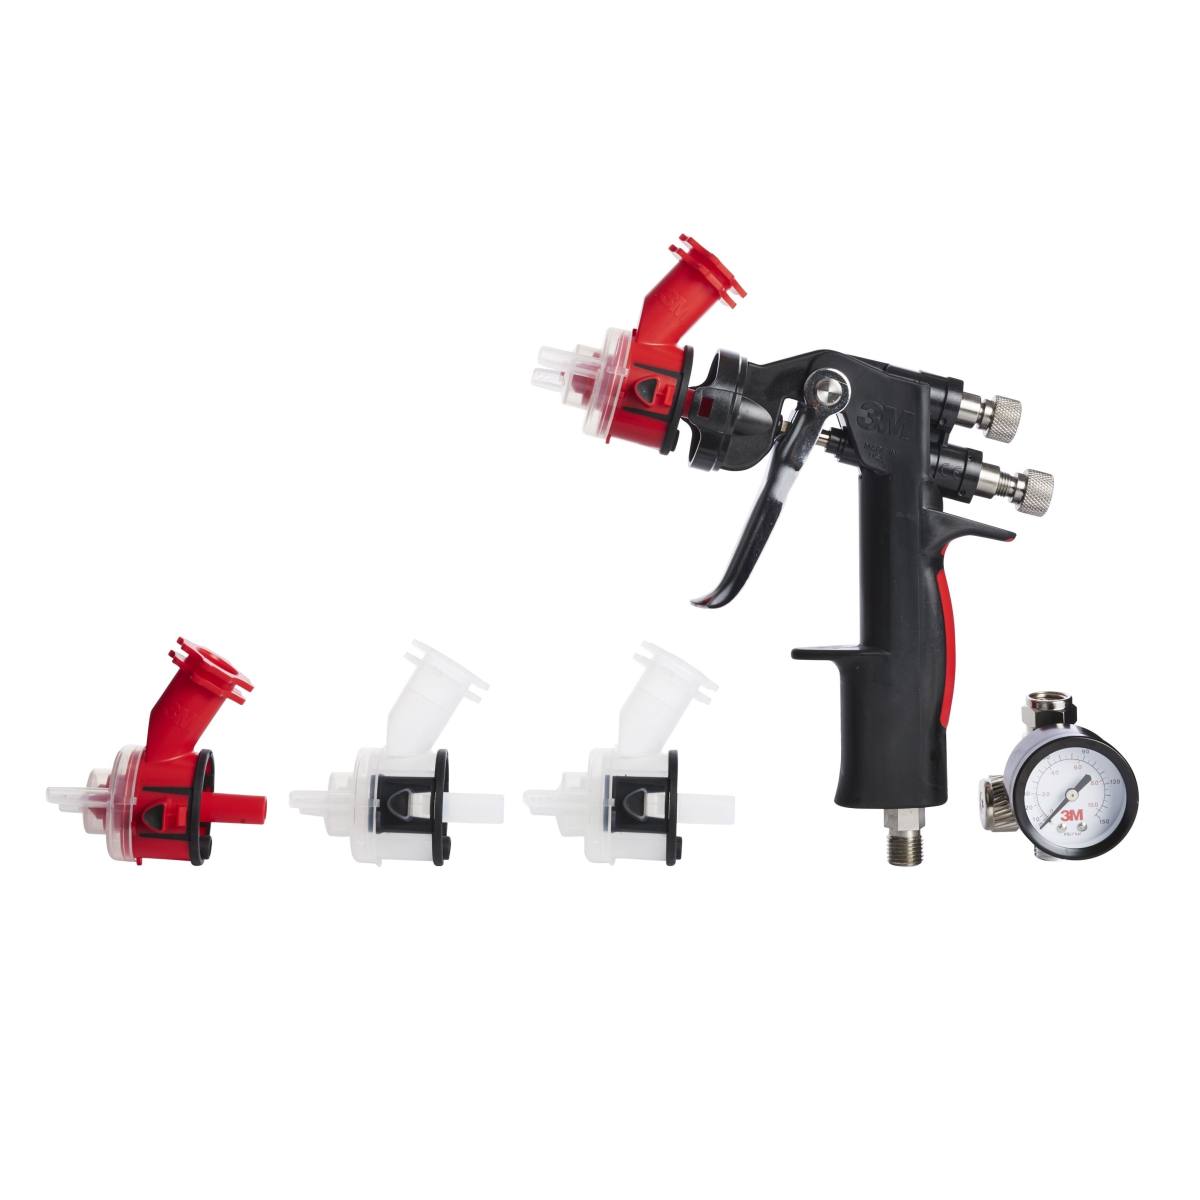 3M Accuspray pressure cup gun HGP, packaging contents: 1x pressure cup gun, 2x nozzle heads 2.0mm red 16609, 2x nozzle heads 1.8mm white 16611, 1 pressure gauge #16587N